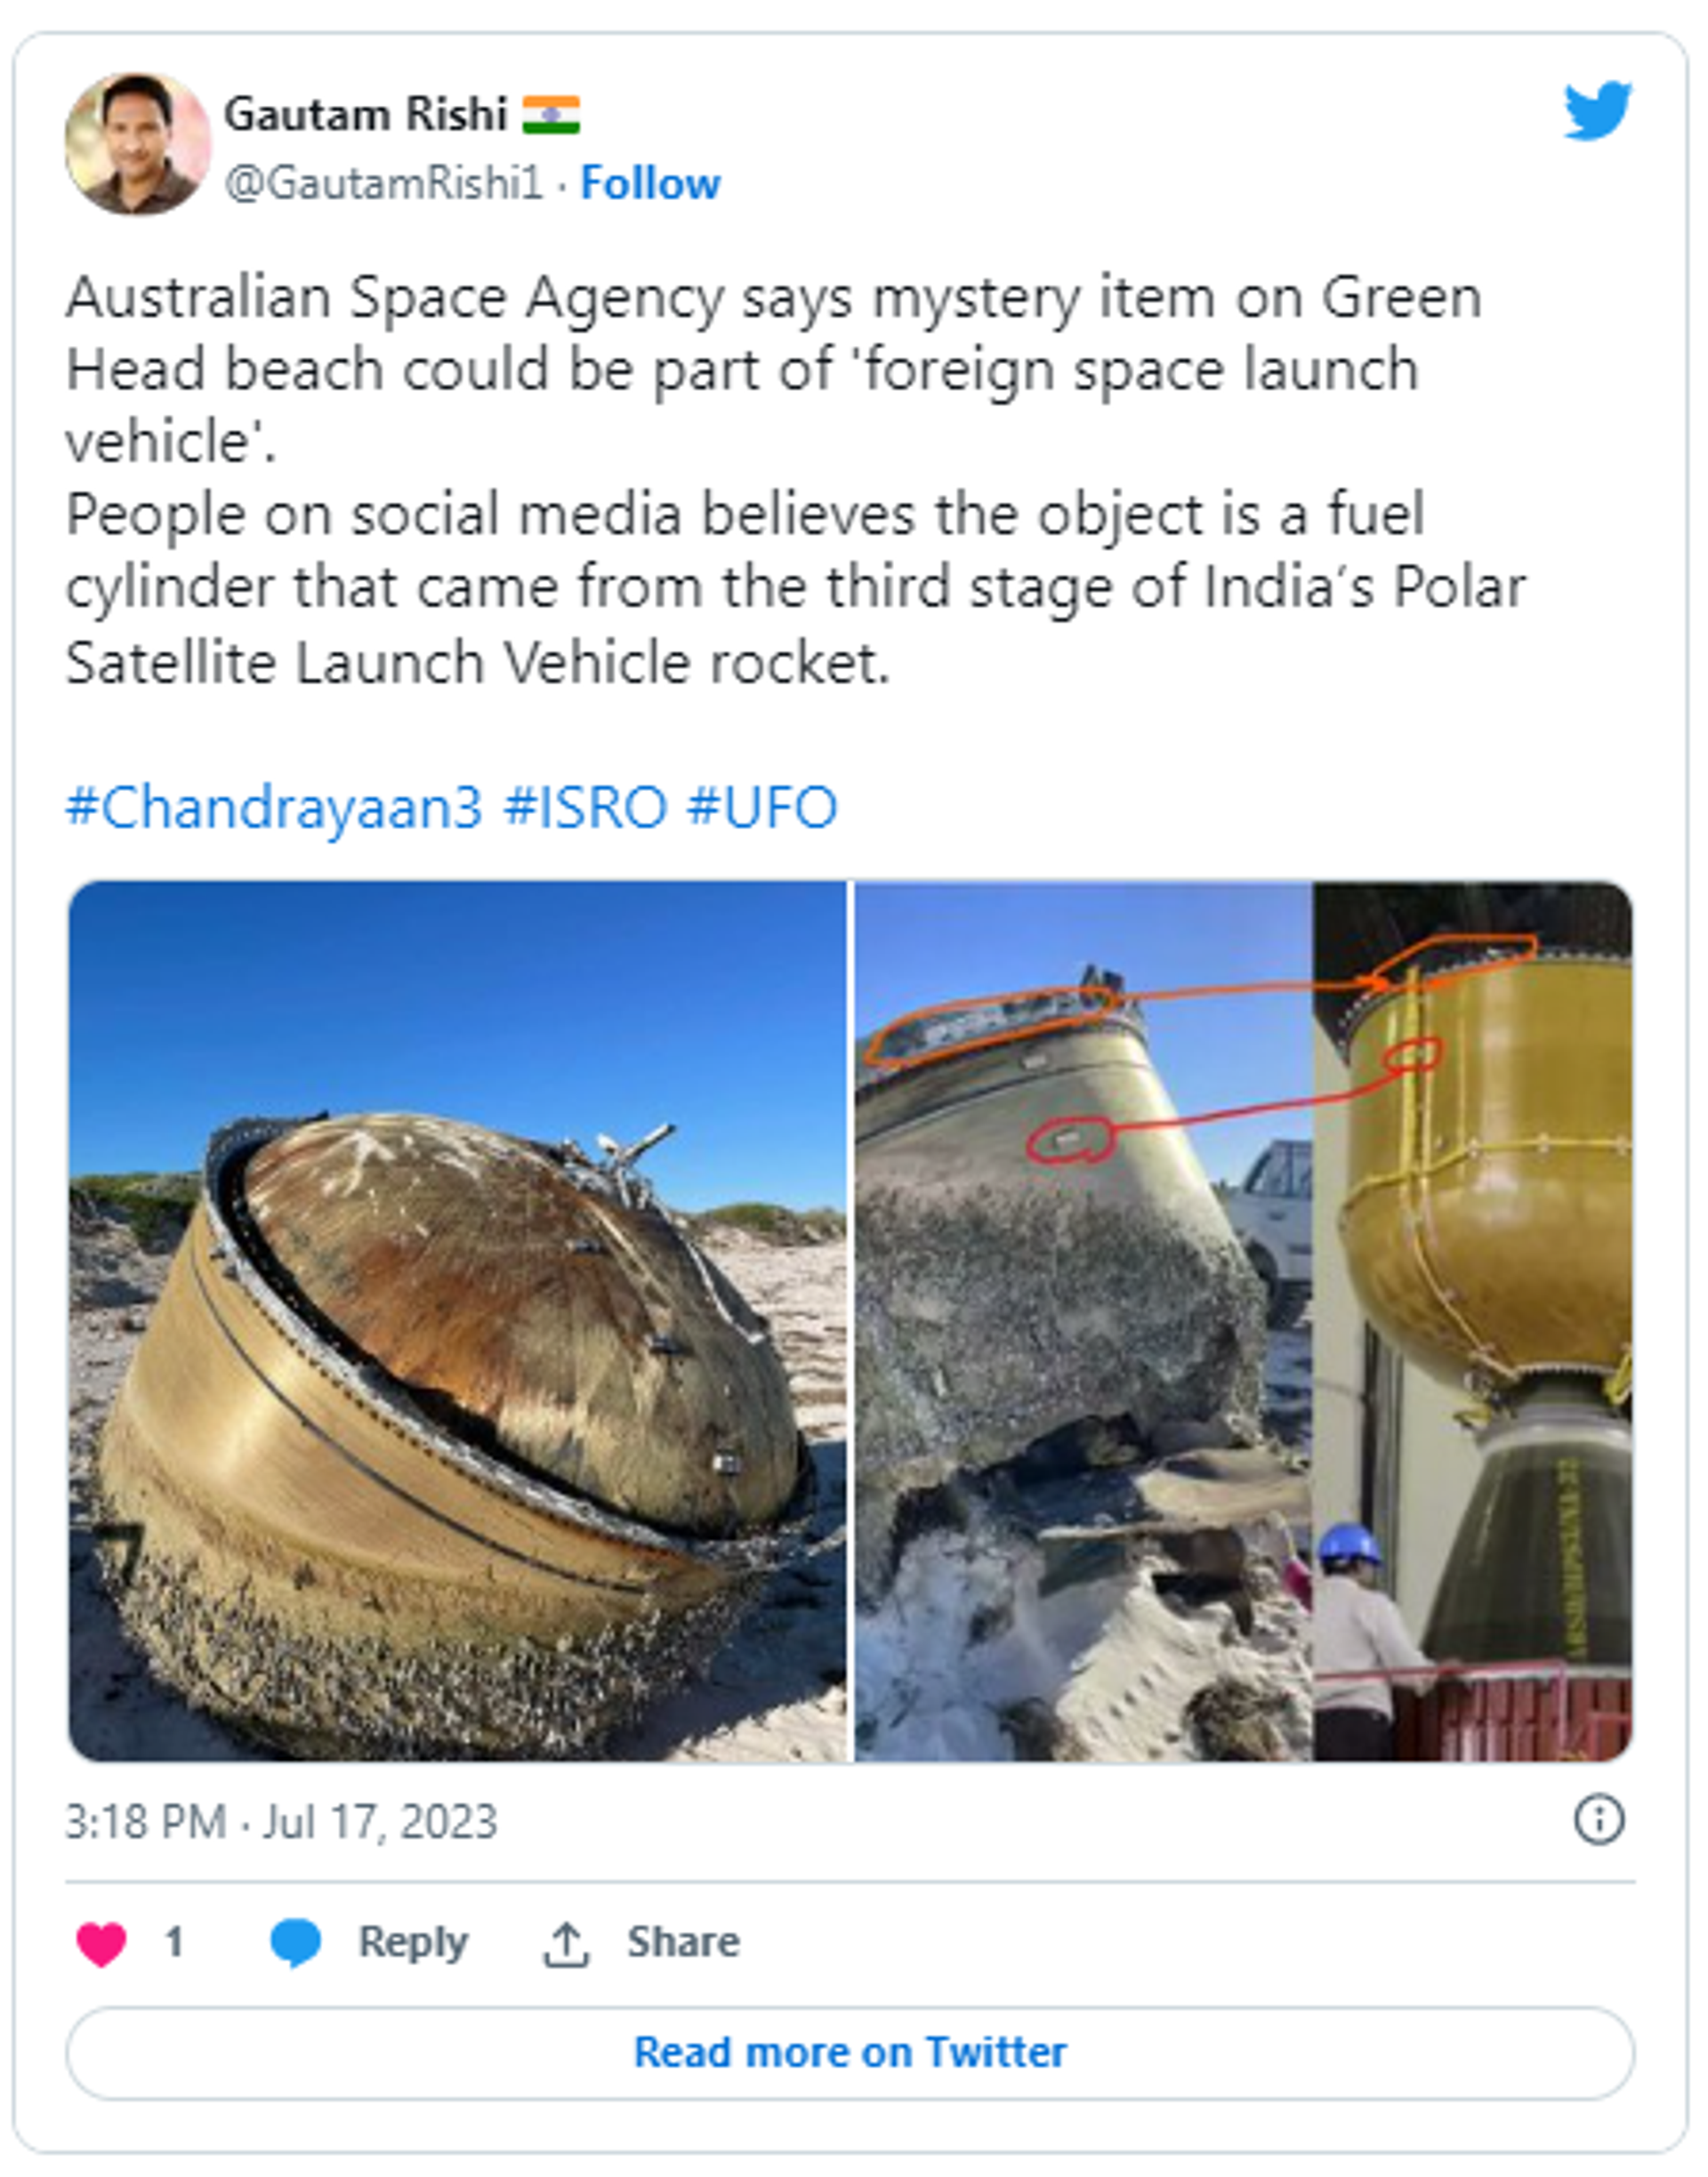 Mysterious cylinder likely to be ISRO satellite debris washes up on Australian beach - Sputnik India, 1920, 17.07.2023